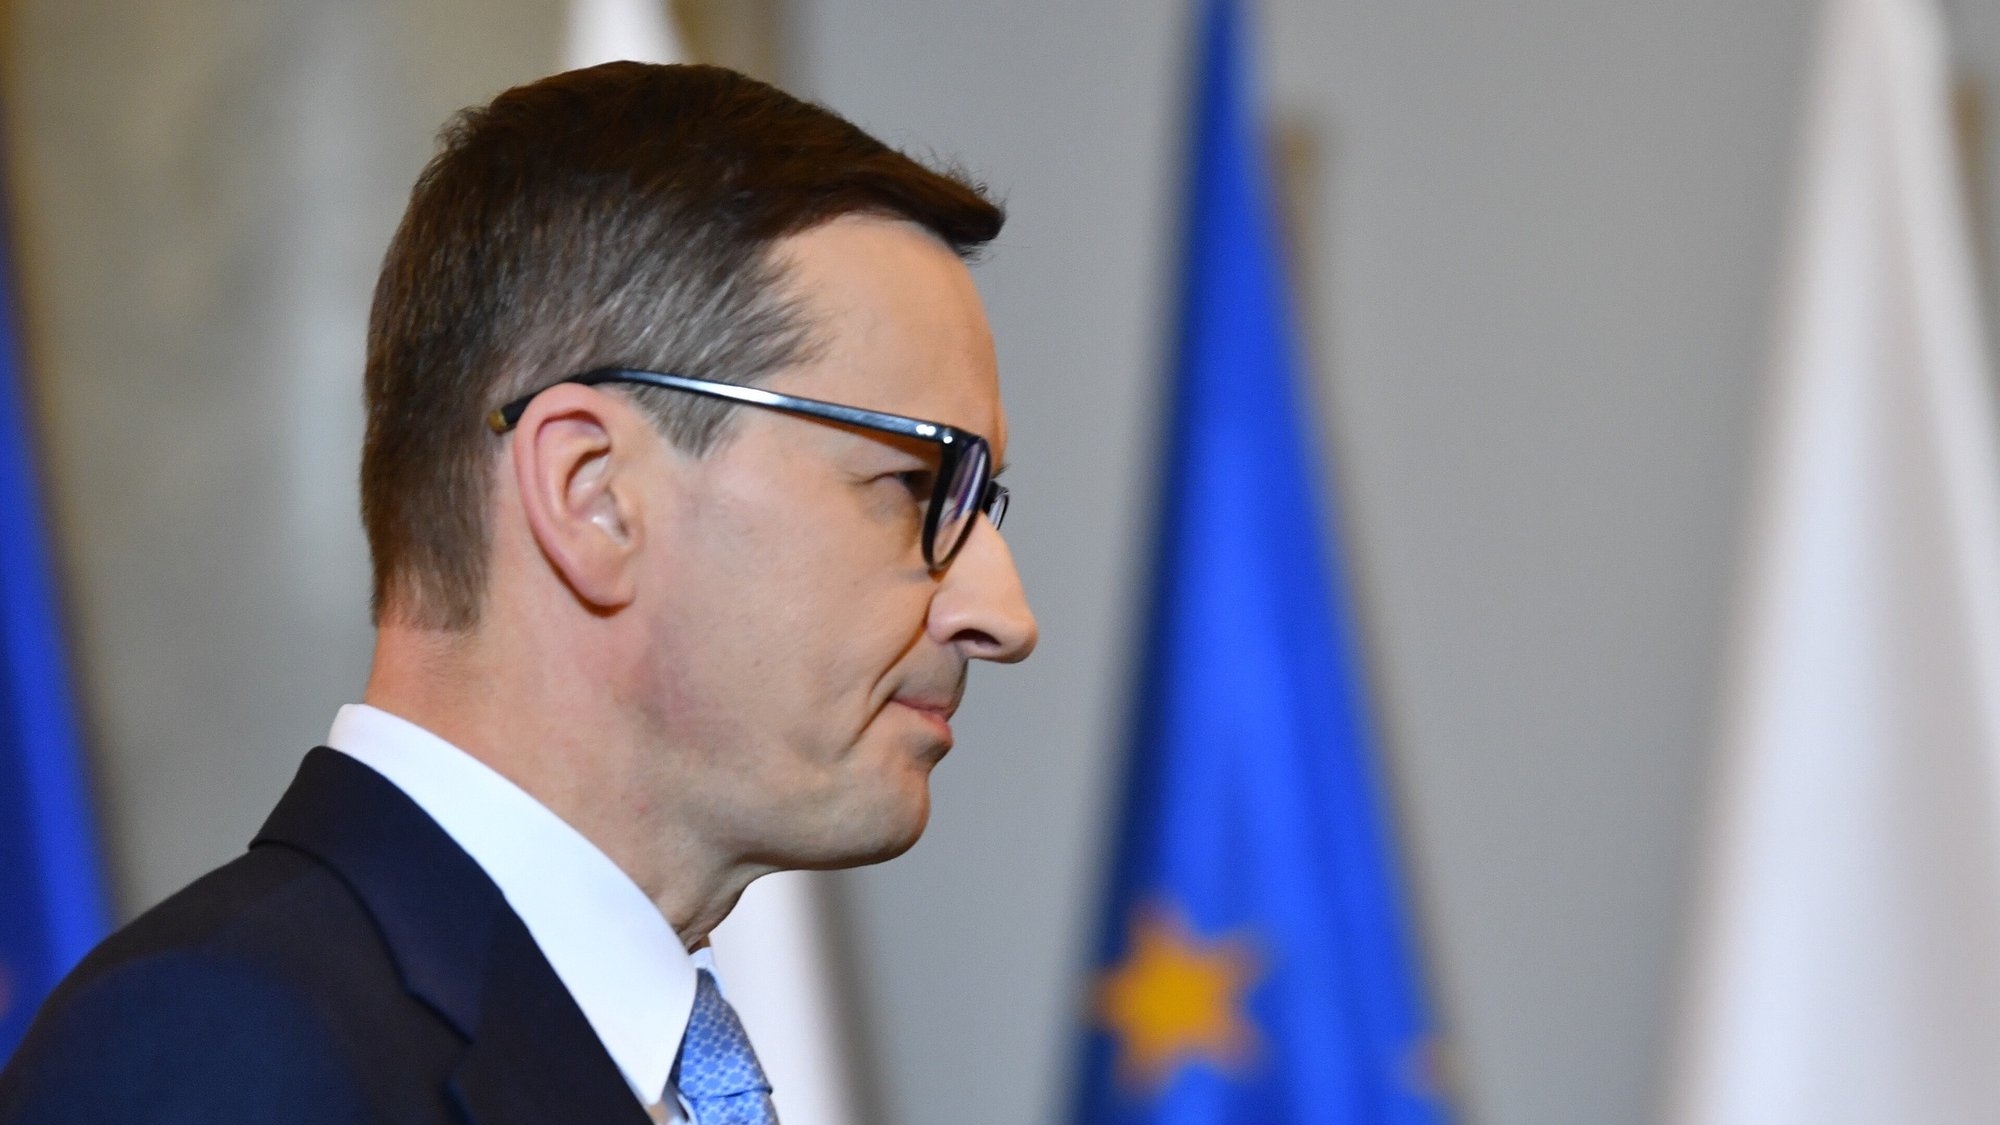 epa09926934 Polish Prime Minister Mateusz Morawiecki during the welcome of the head of the European Council Charles Michel, at the seat of the Chancellery of the Prime Minister in Warsaw, Poland, 04 May 2022. An international donor conference for Ukraine will take place on 05 May in Warsaw. The initiators of the conference are Prime Minister Mateusz Morawiecki and Prime Minister of Sweden Magdalena Andersson, and the partners of the event are the President of the European Council Charles Michel and the President of the European Commission Ursula von der Leyen.  EPA/RADEK PIETRUSZKA POLAND OUT